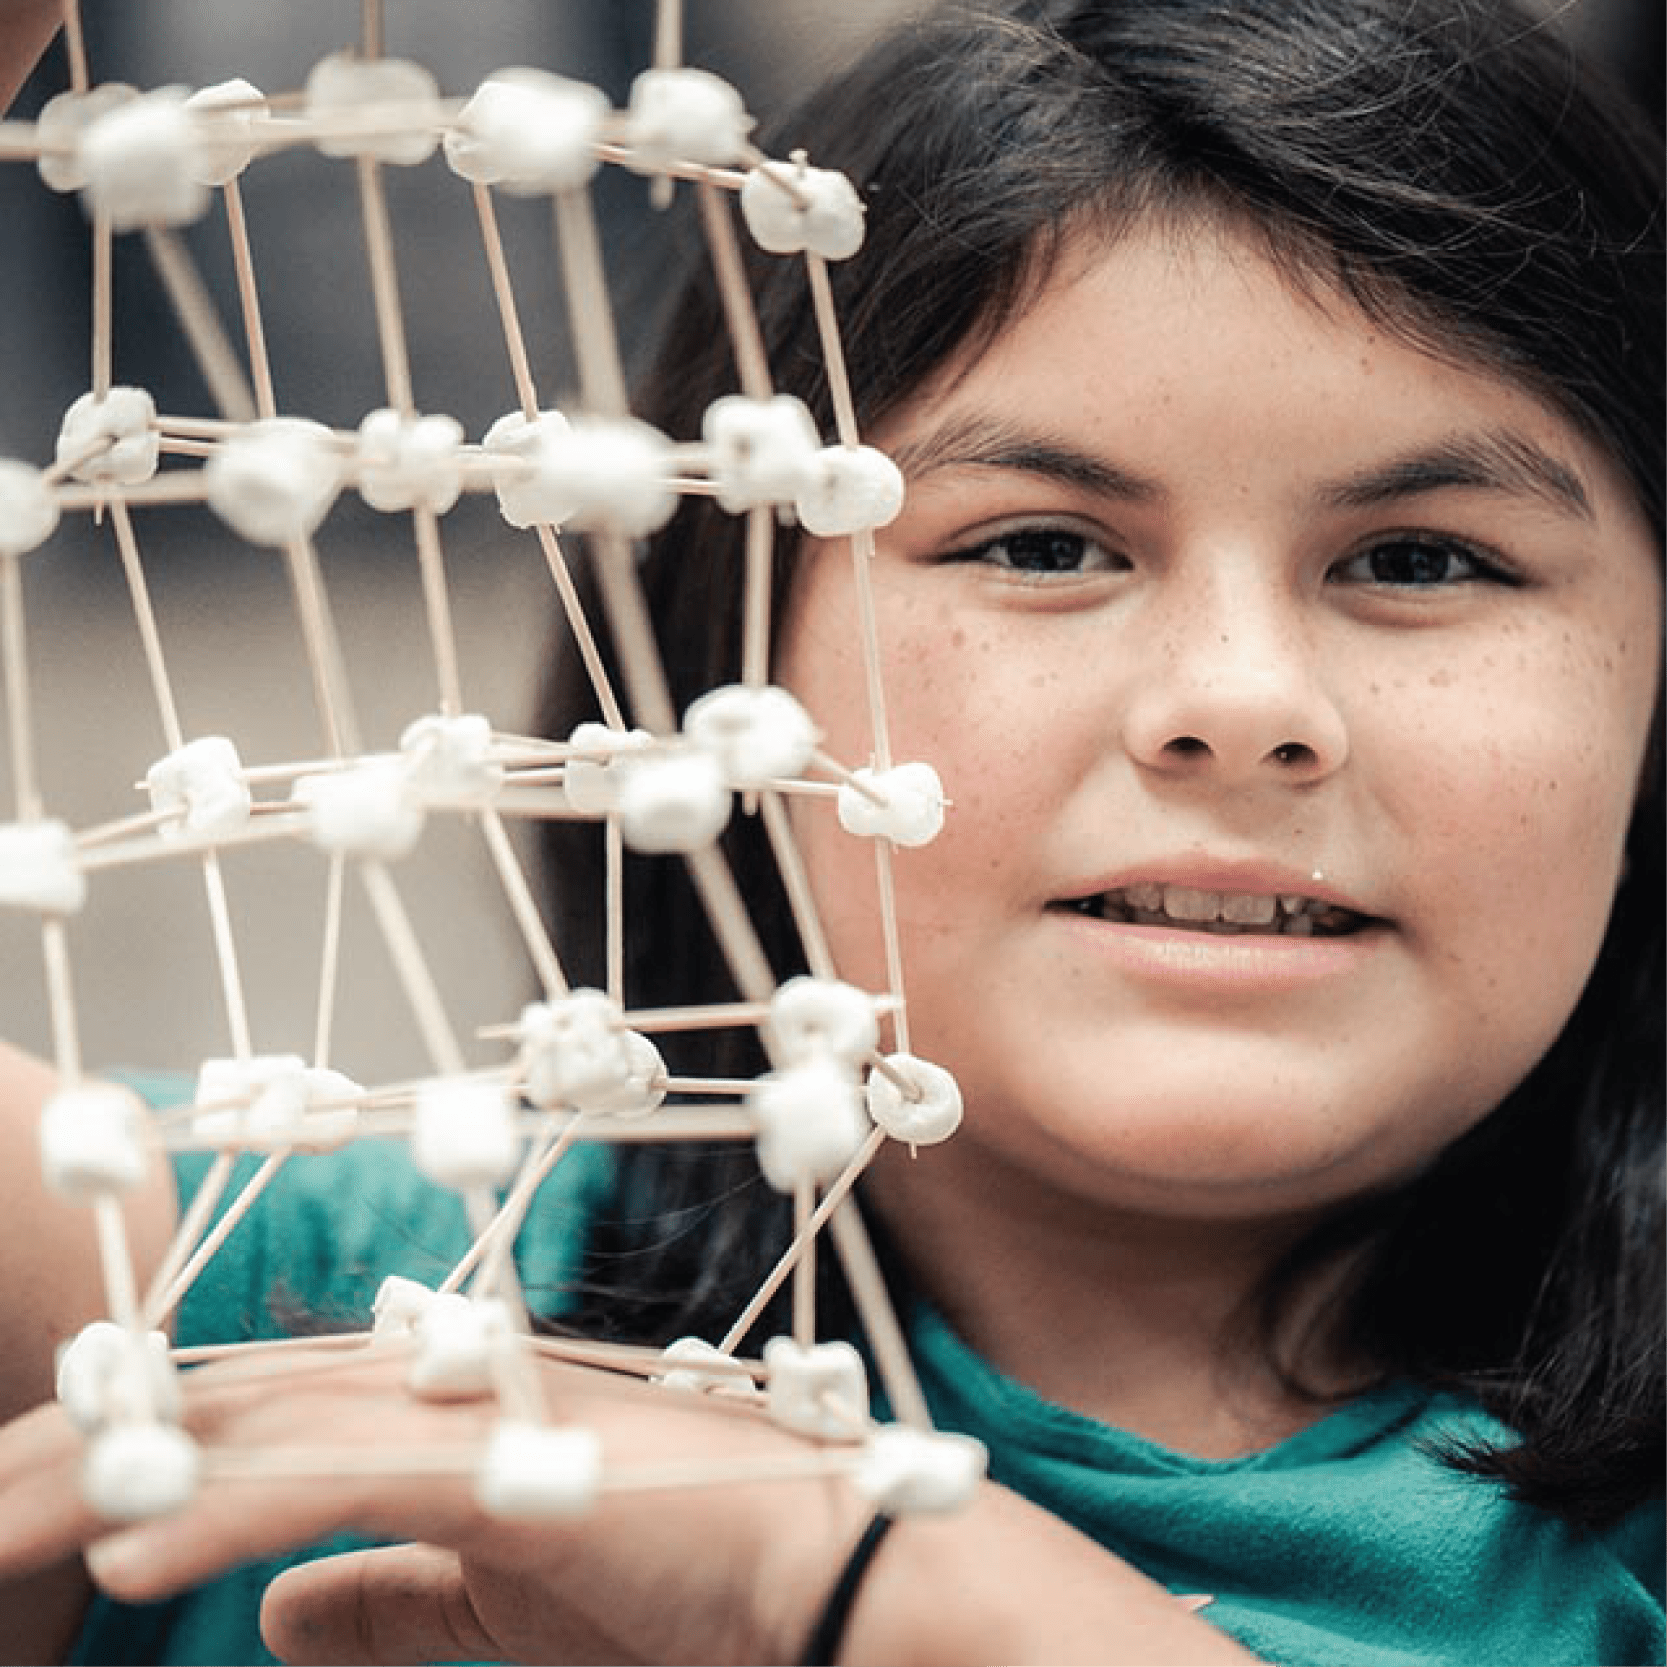 A girl proudly holds up her rectangular STEM creation made up of toothpicks and mini-marshmallows.